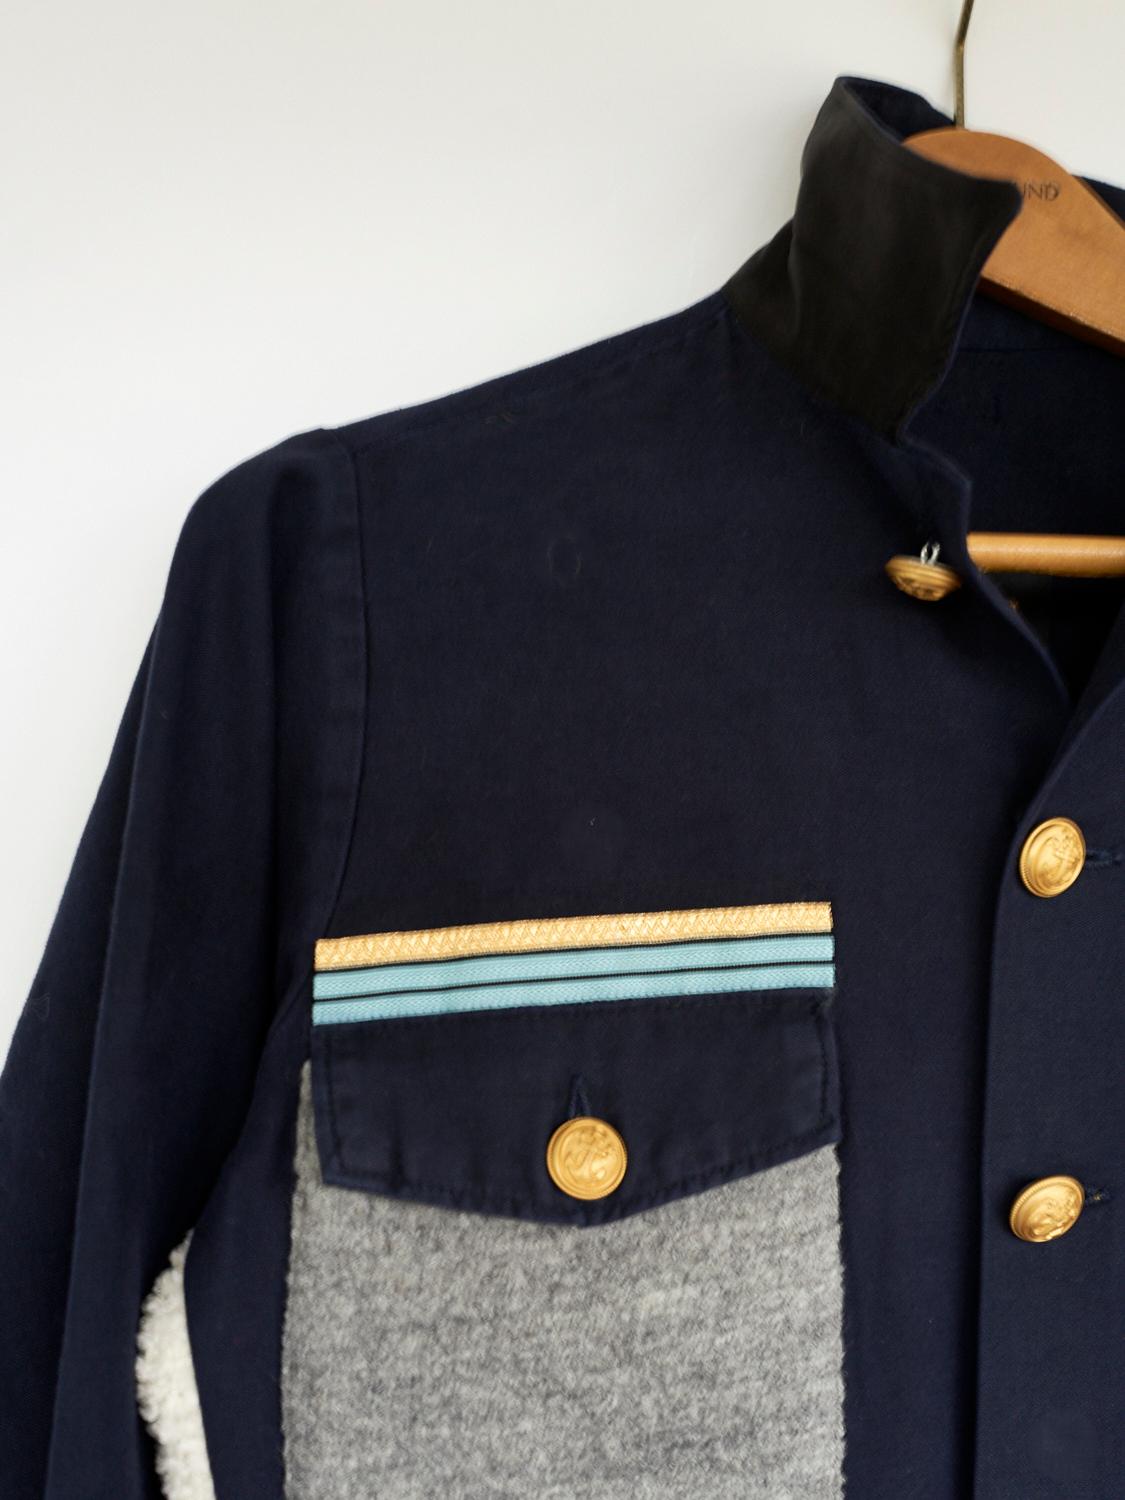 Embellished Grey Wool, French White Fuzzy Blend on a Dark Blue Jacket Military Gold Braid 
Brand: J Dauphin
Size: S/M
Sustainable Luxury, Collectible Vintage Re- Purposed

Our one of a kind, zero waste, up-cycled jackets are made from vintage,